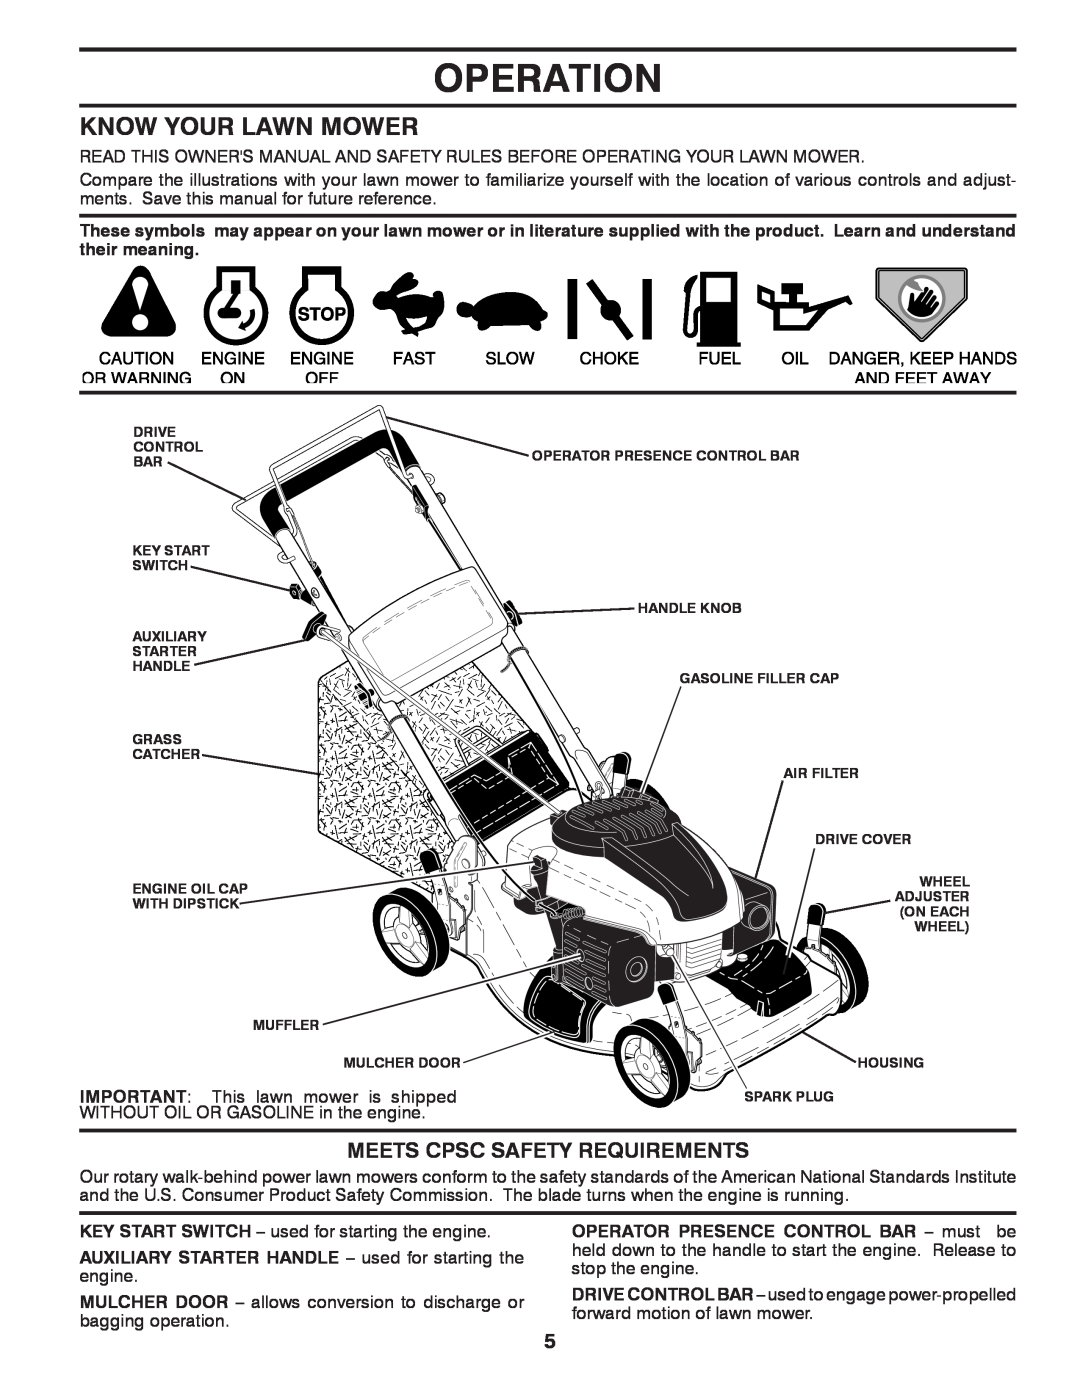 Husqvarna XT722FE manual Operation, Know Your Lawn Mower, Meets Cpsc Safety Requirements 